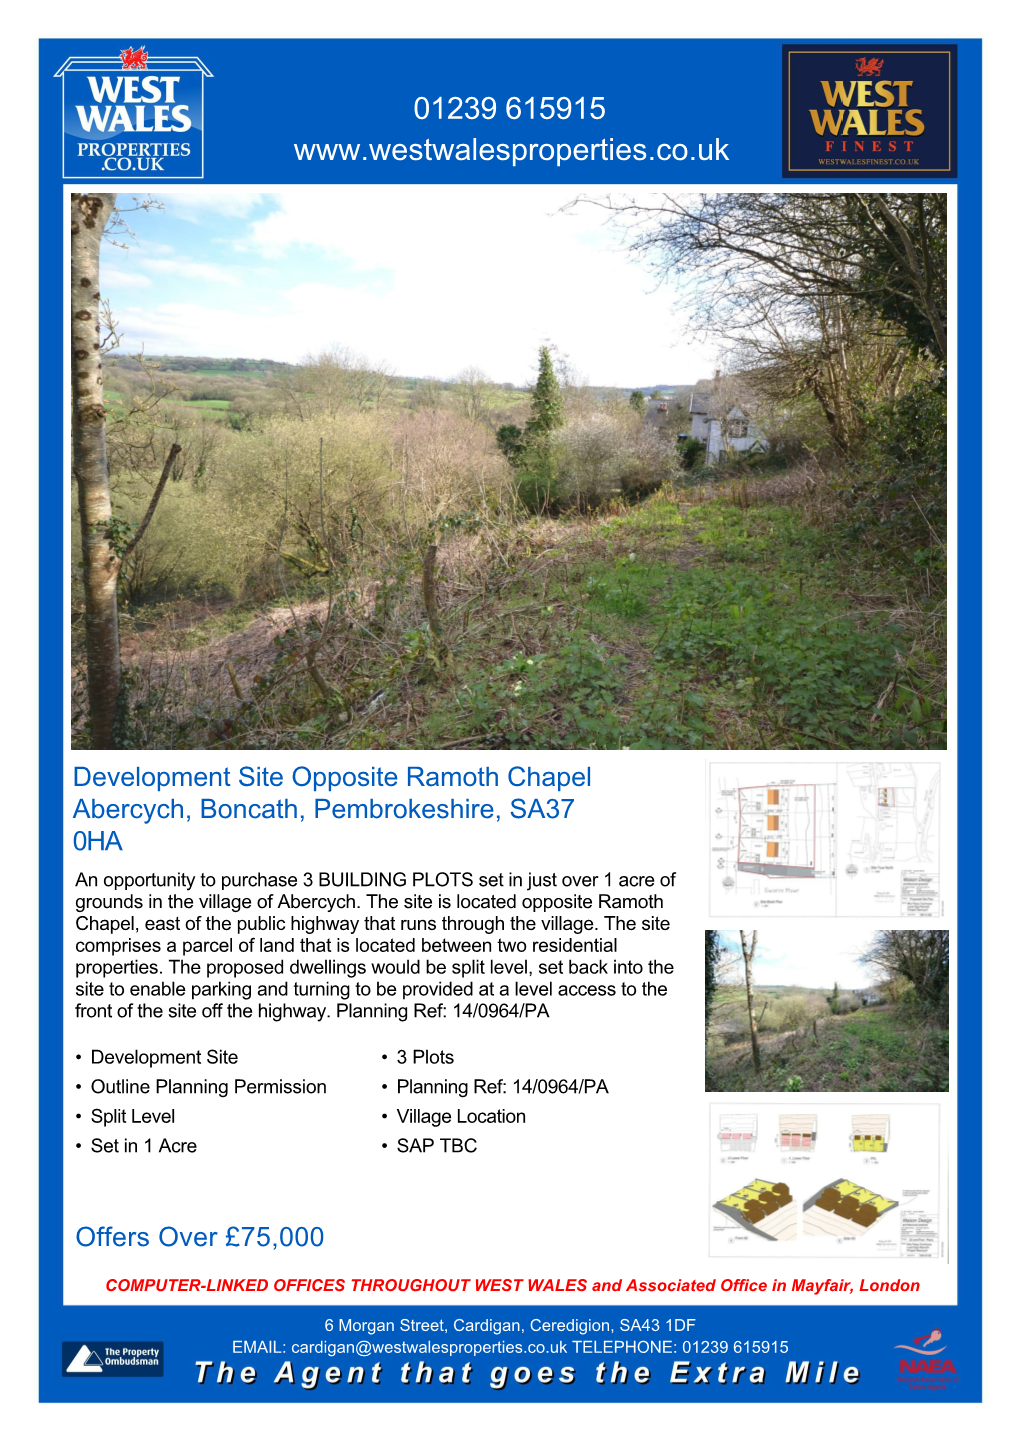 Abercych, Boncath, Pembrokeshire, SA37 0HA an Opportunity to Purchase 3 BUILDING PLOTS Set in Just Over 1 Acre of Grounds in the Village of Abercych